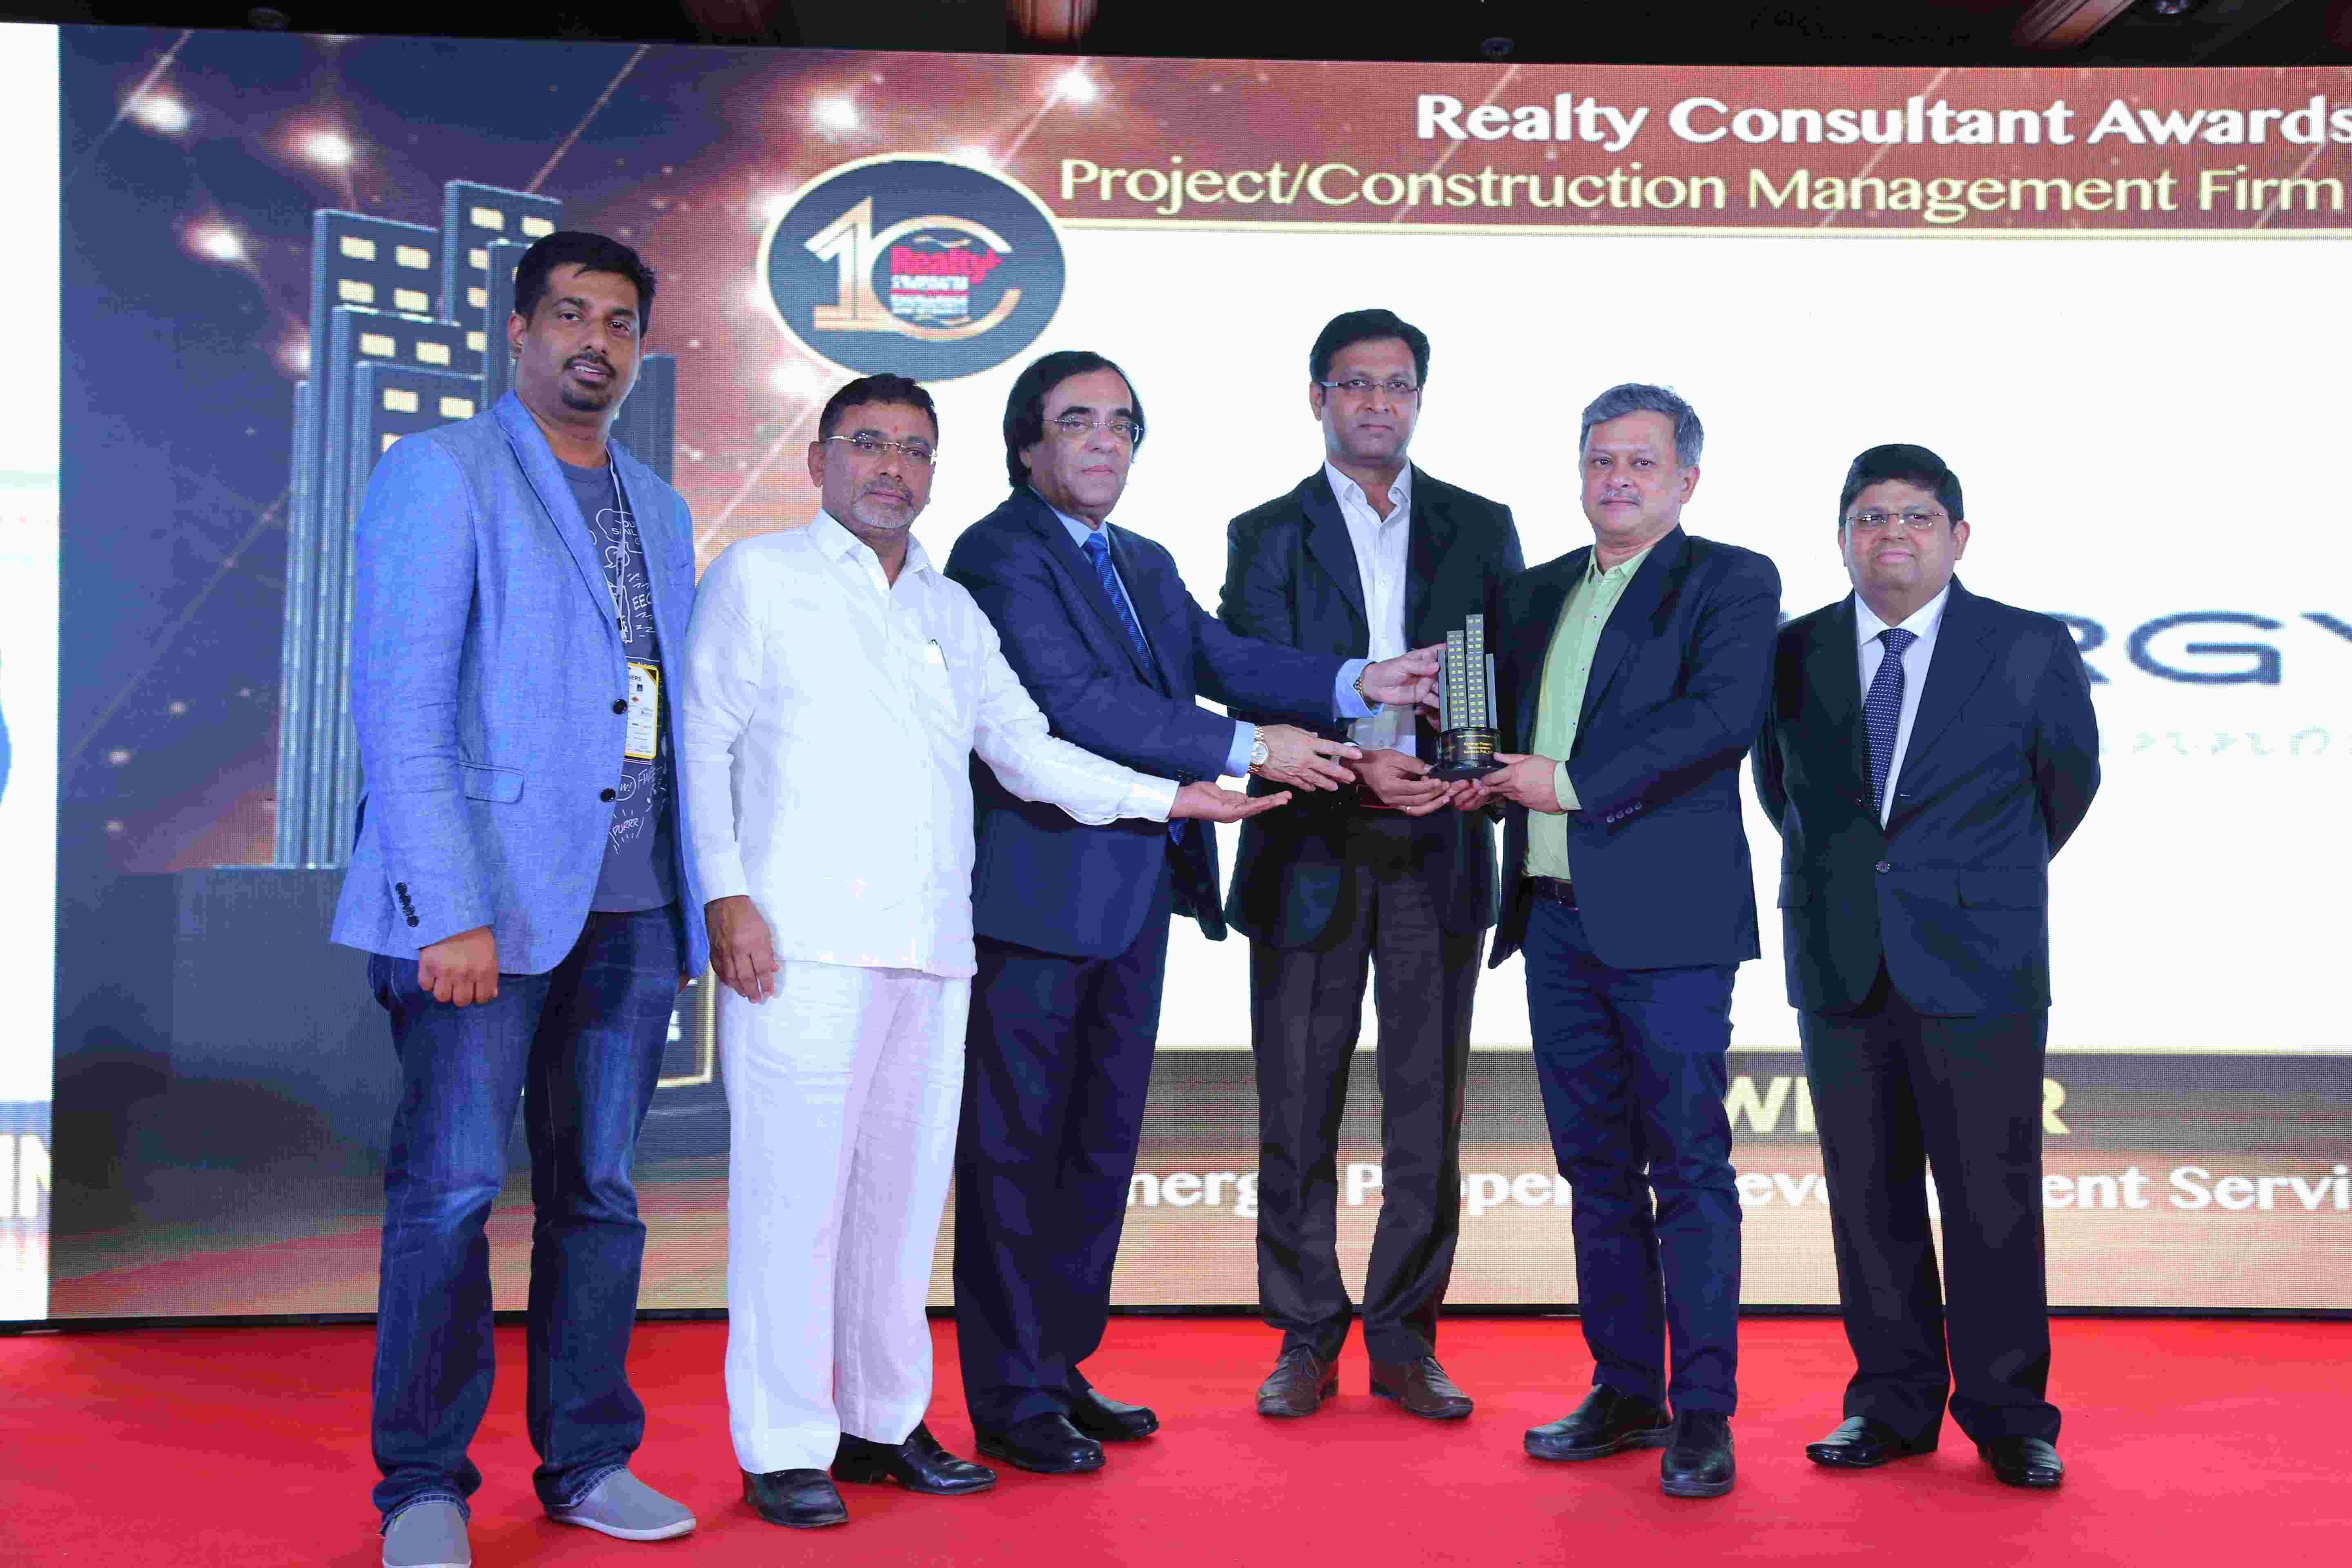 Synergy Property Development Services recognized as 'Project Management Firm of the Year 2018' Update